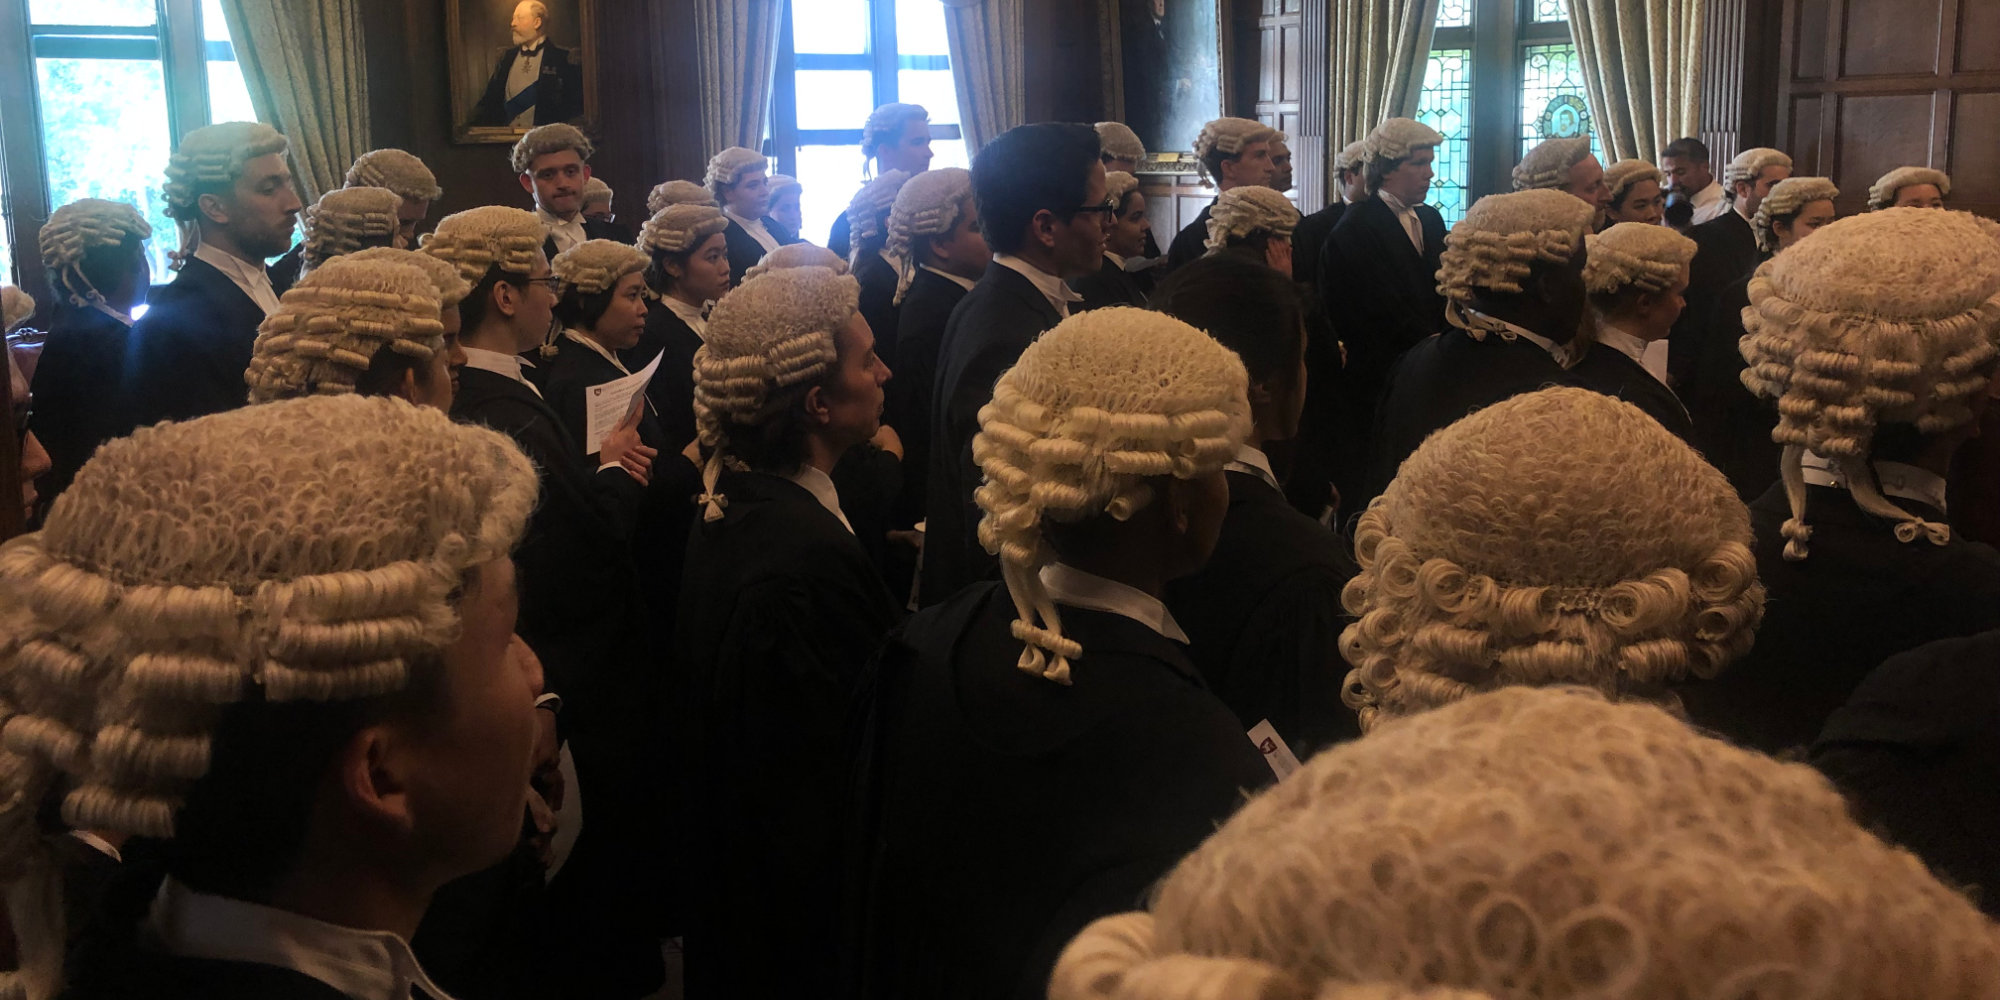 many barristers